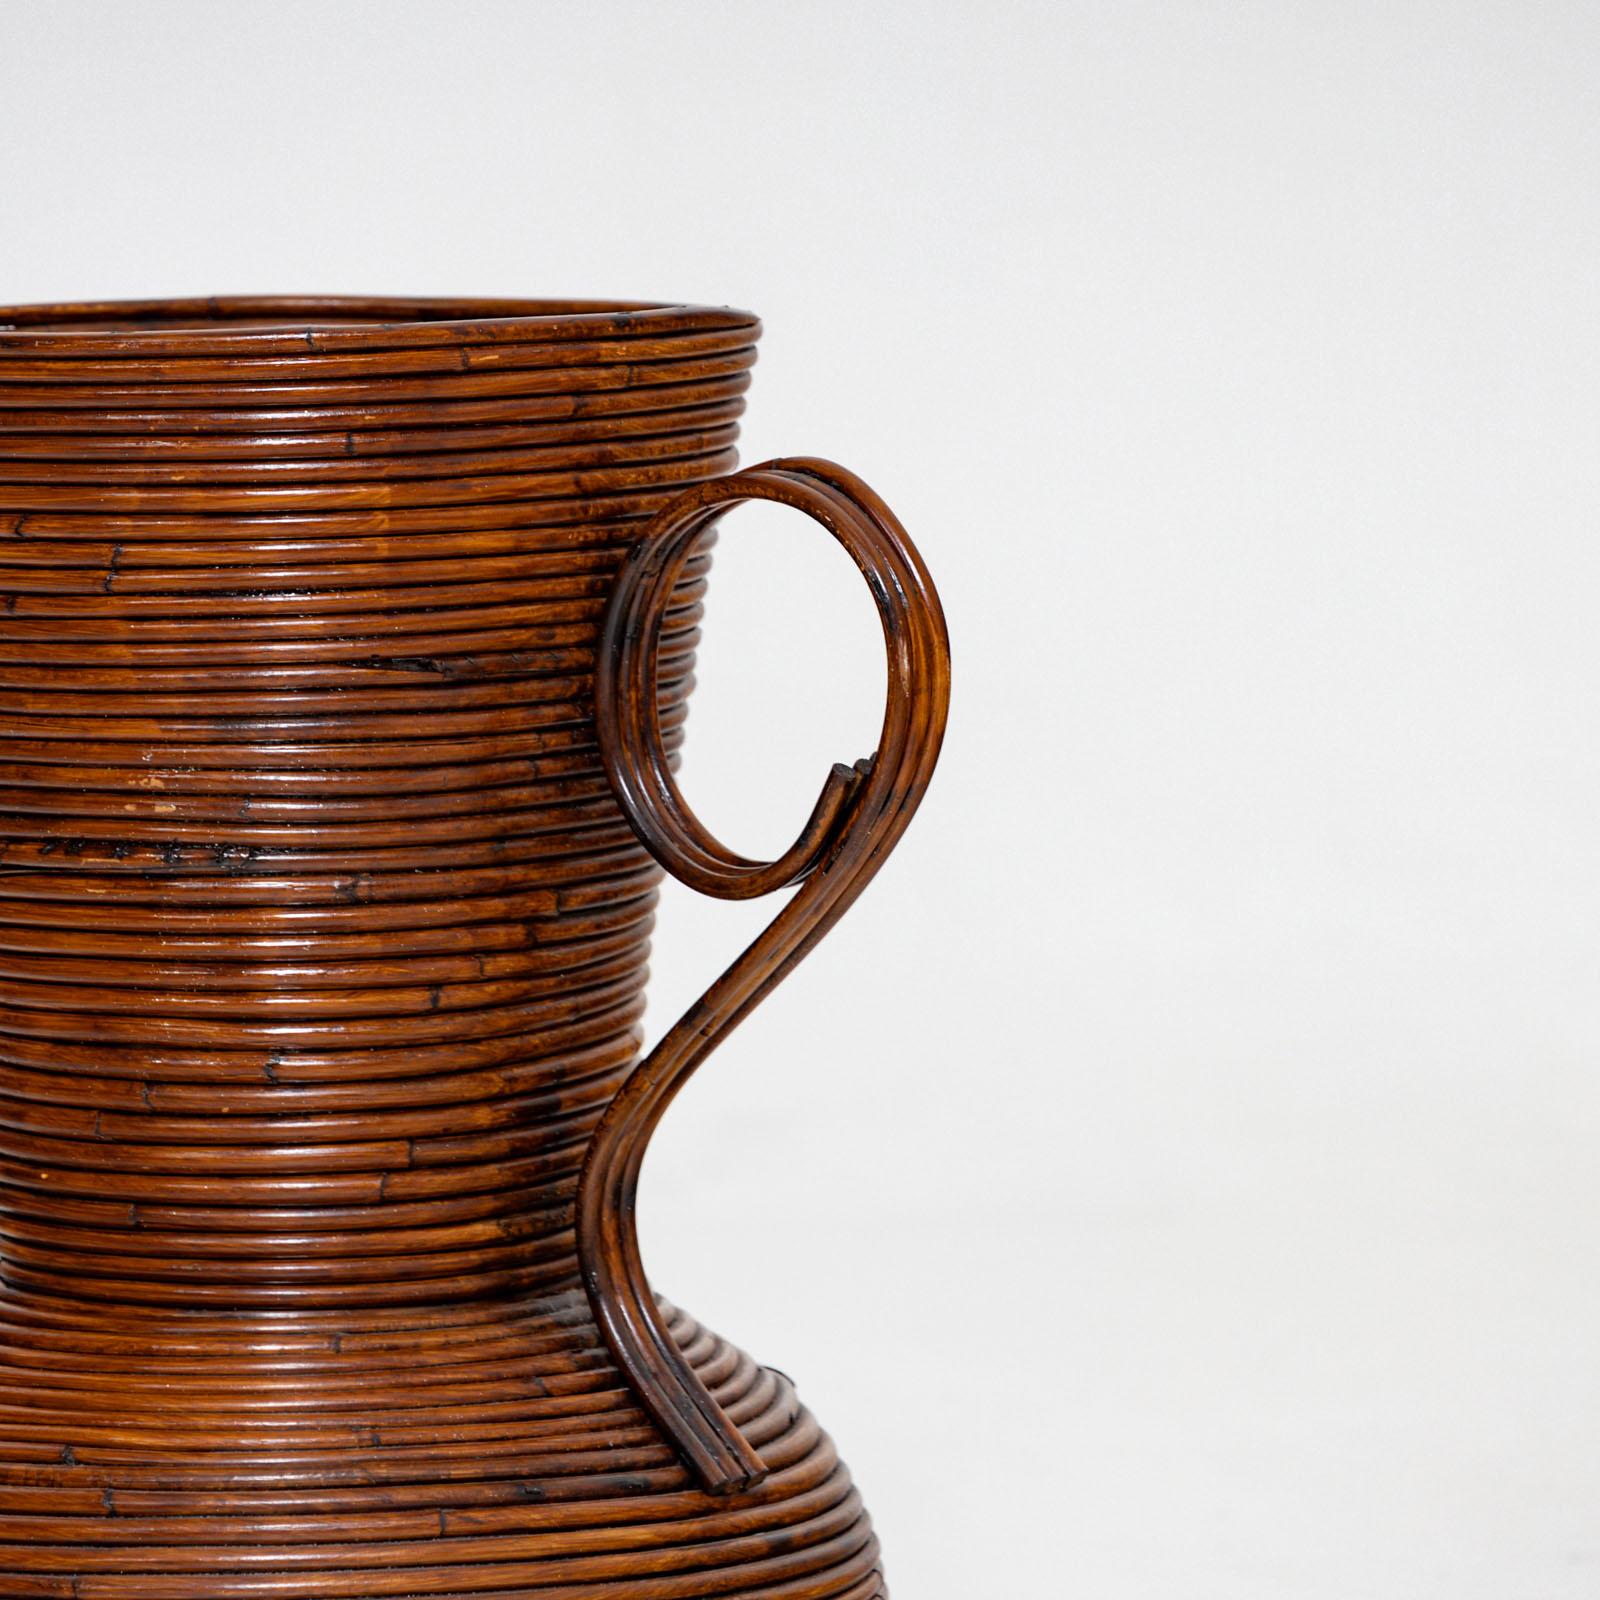 Amphora Vase out of Wicker by Vivai del Sud, Italy 1960s In Good Condition For Sale In Greding, DE